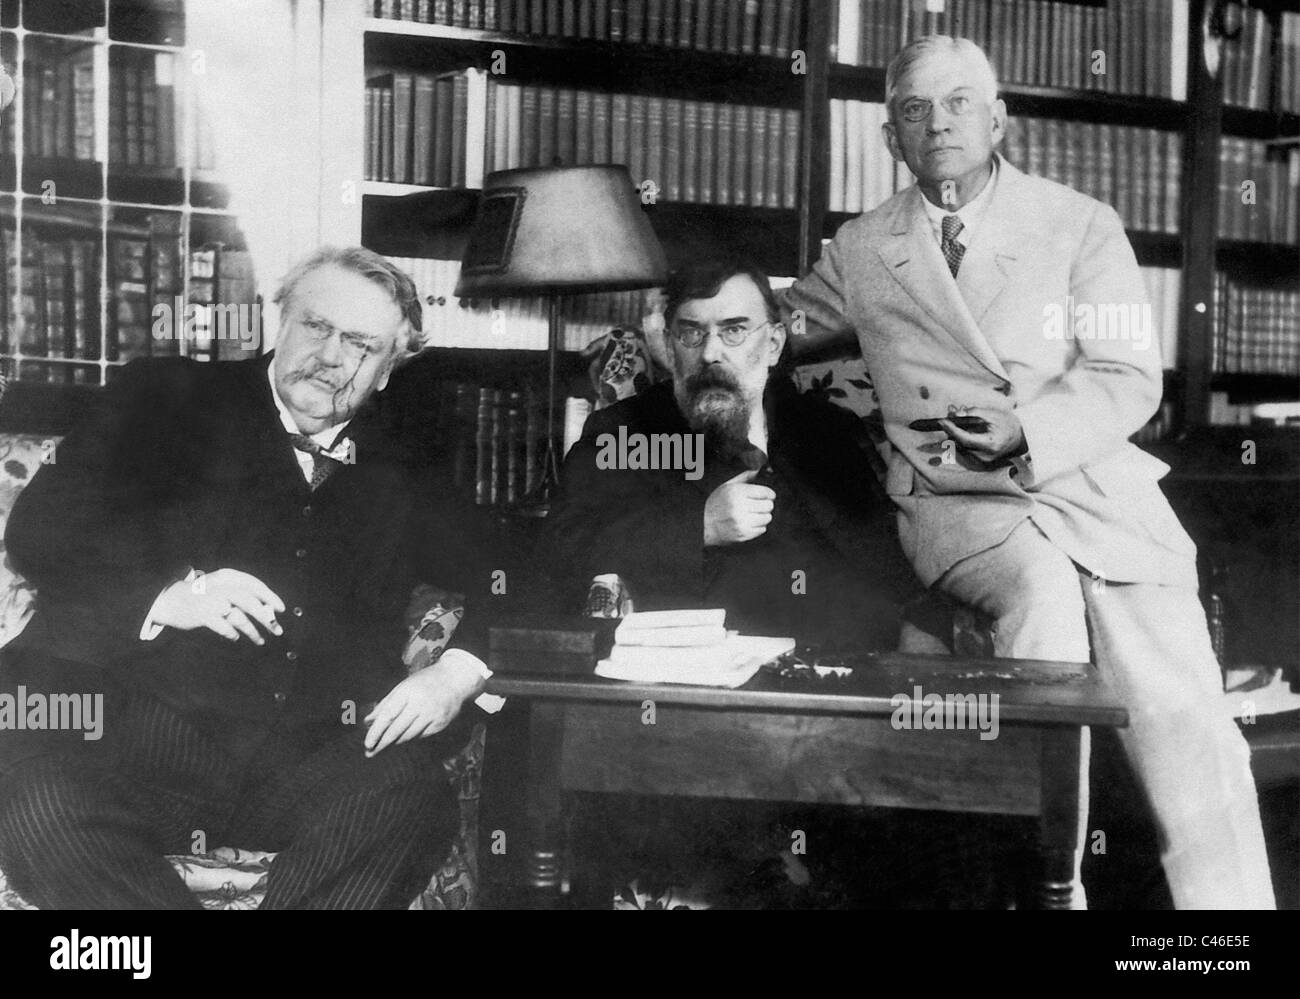 Gilbert Keith Chesterton, George William Russell y William Lyon Phelps, 1931 Foto de stock